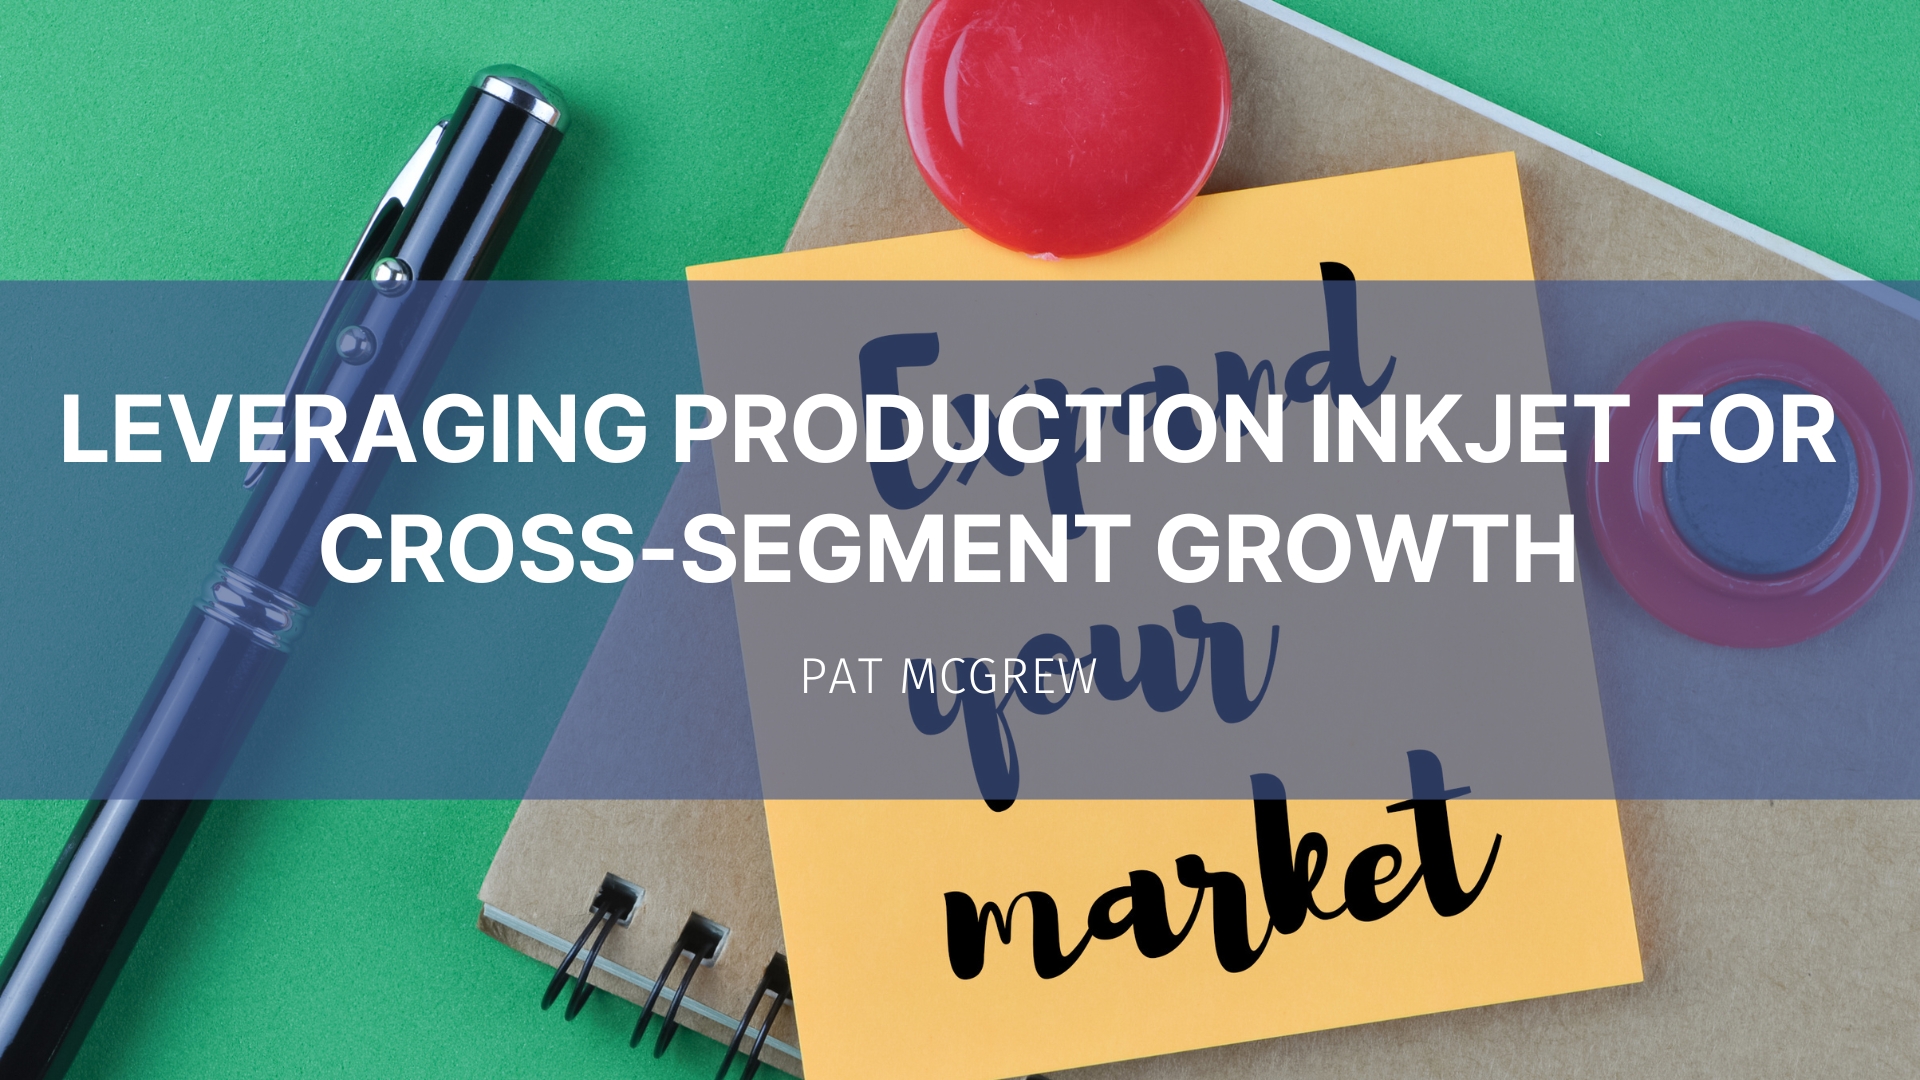 Featured image for “Leveraging Production Inkjet for Cross-Segment Growth”